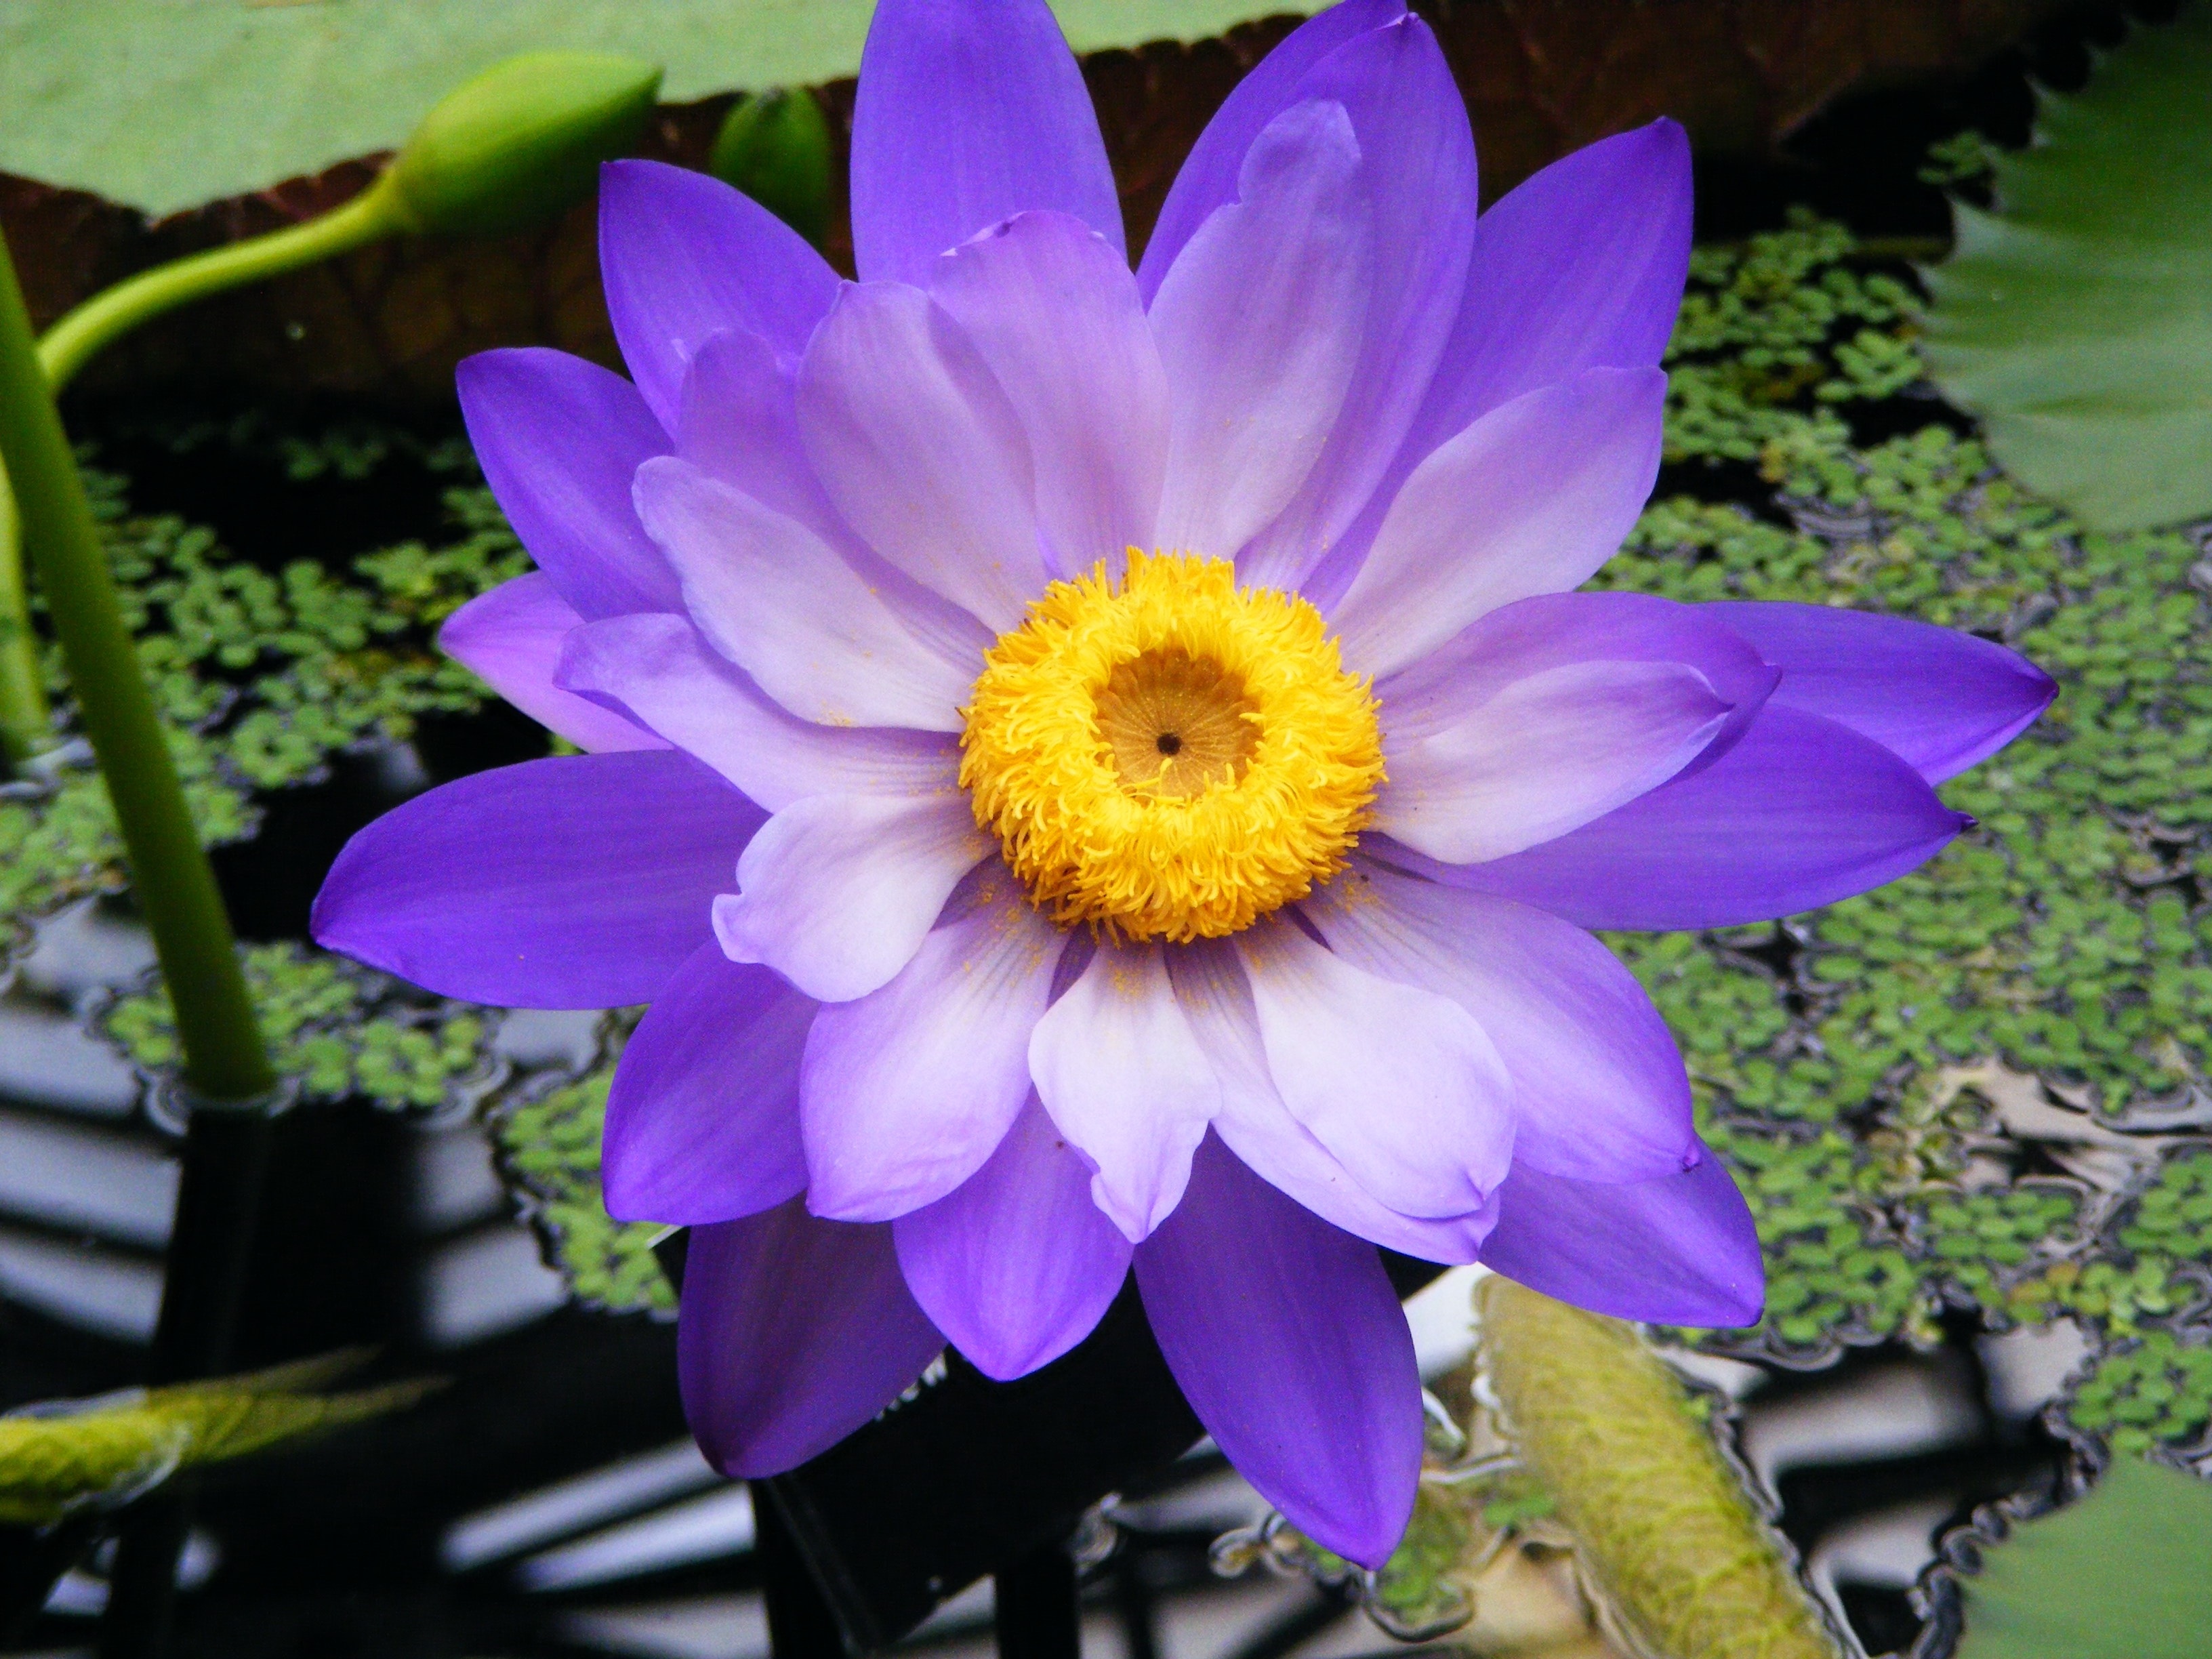 purple and yellow flower outdoor plant